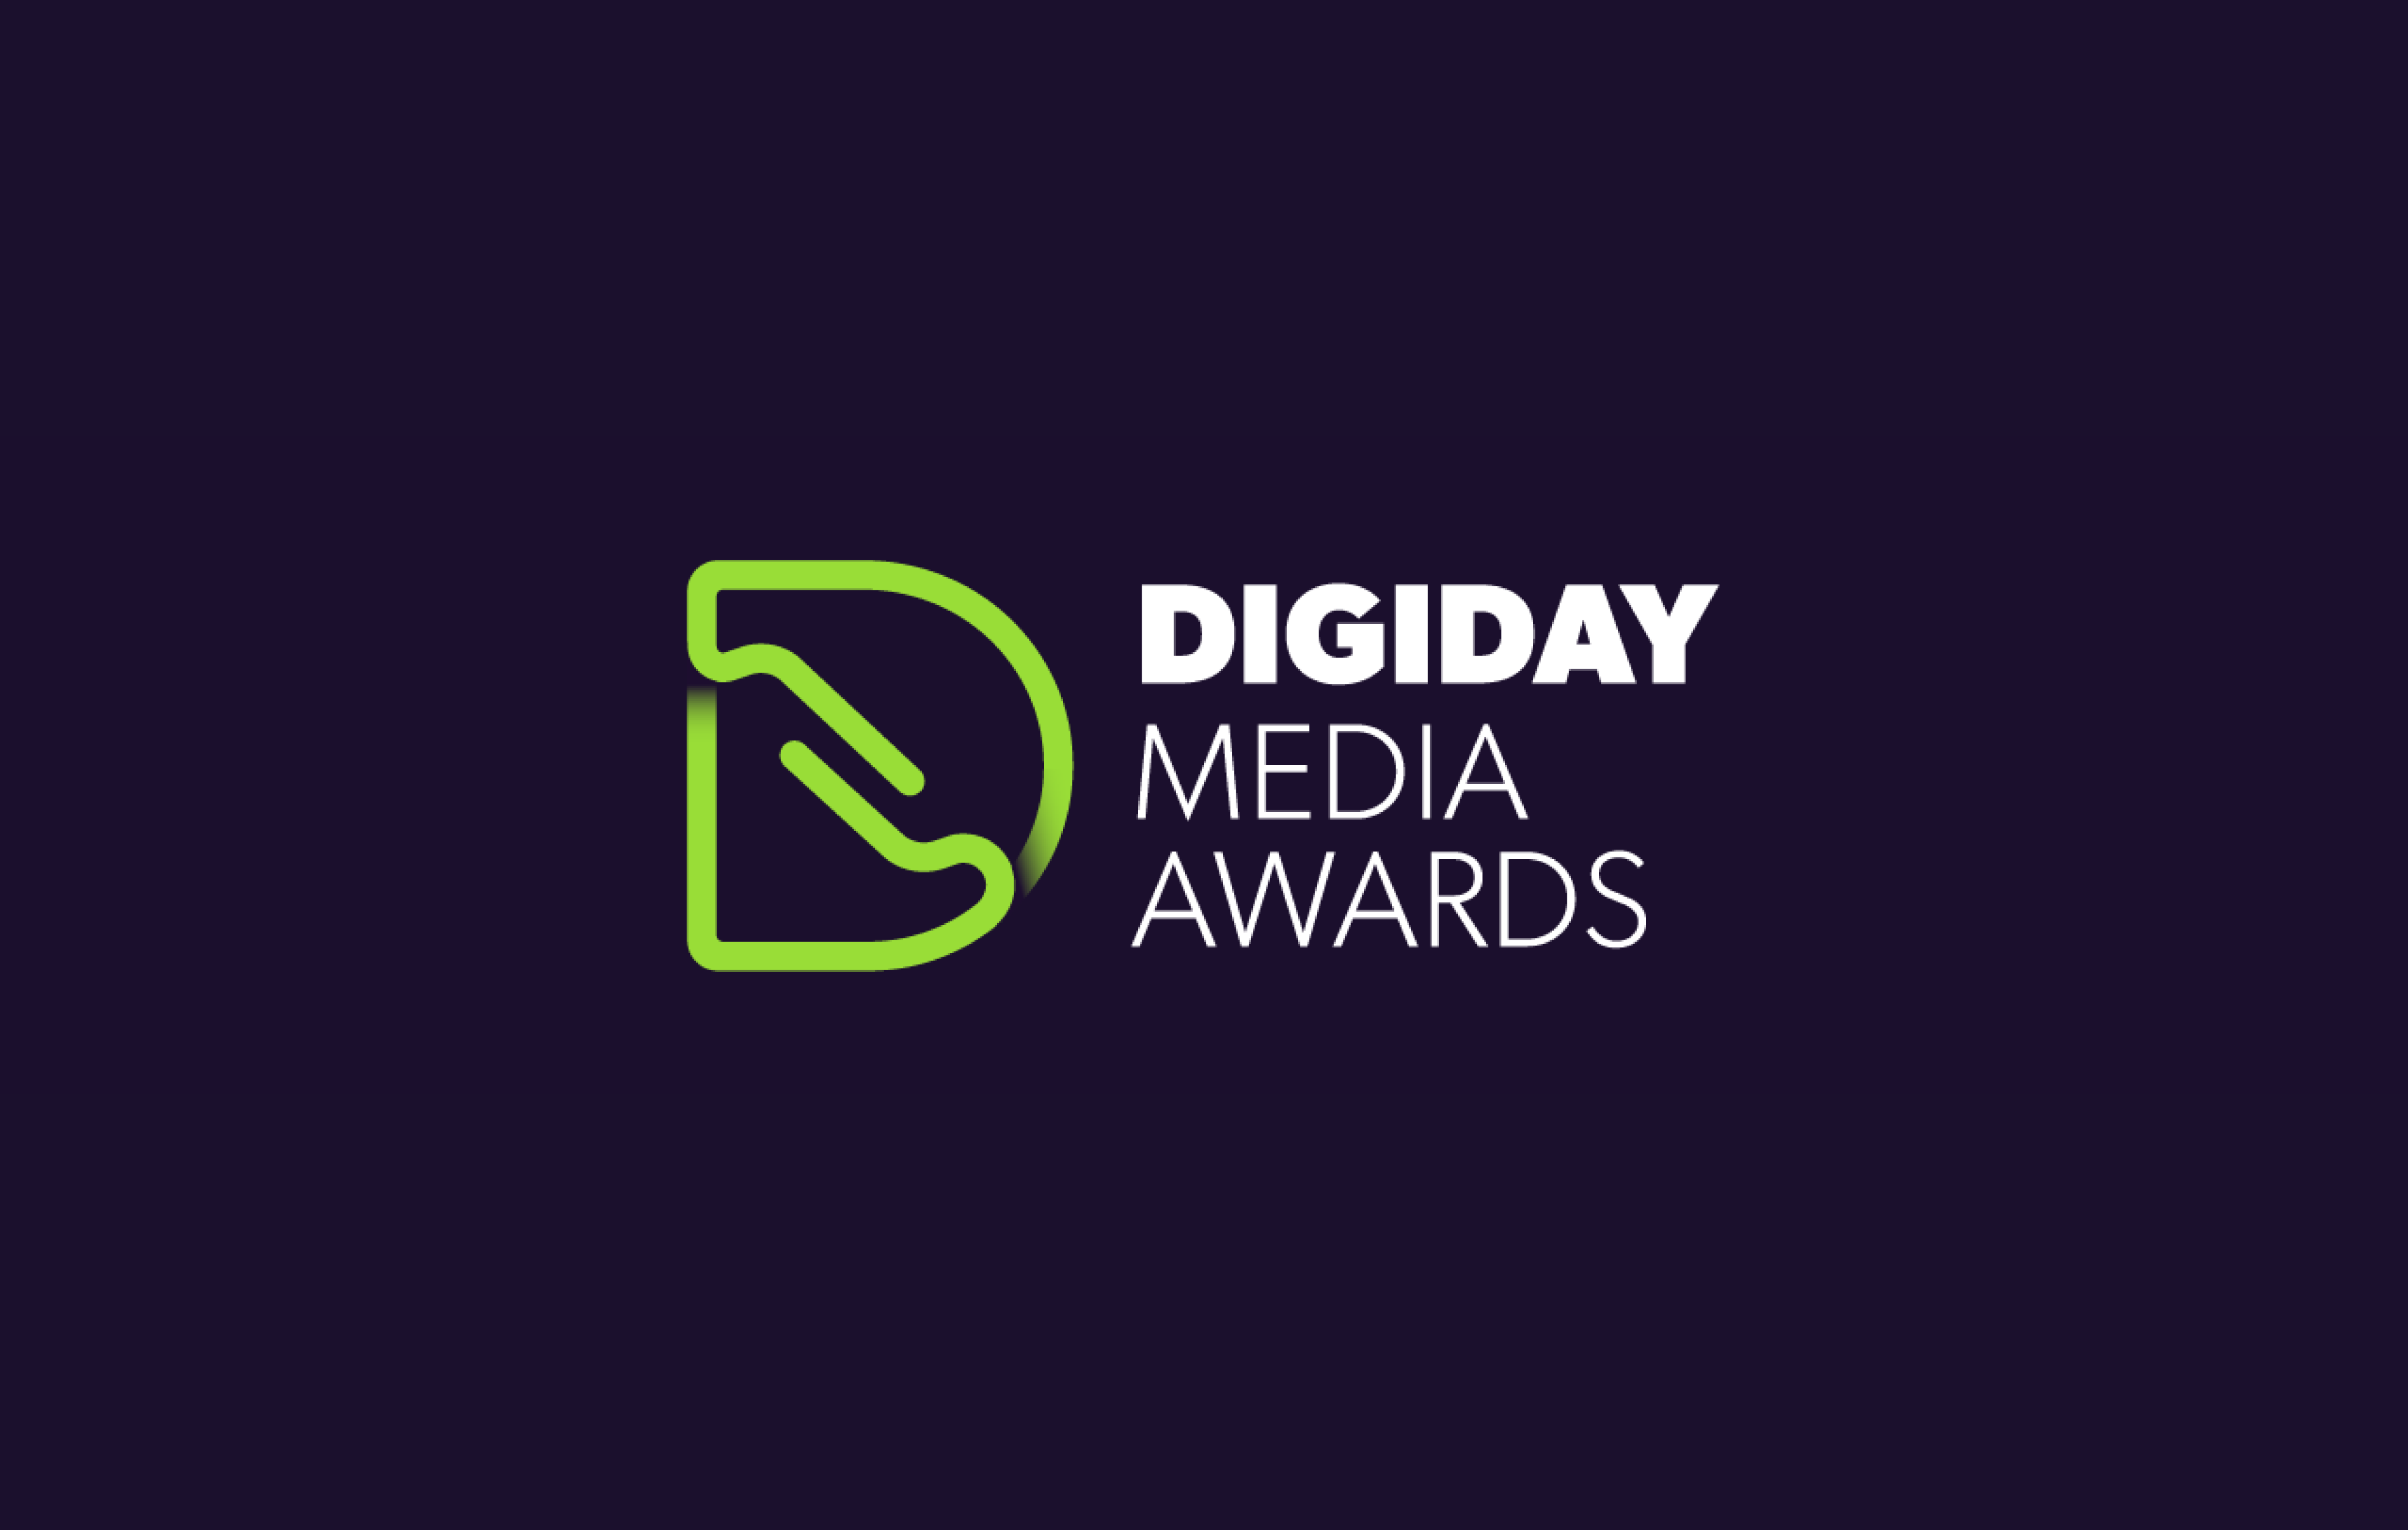 The Brazilian Report, Paramount Brand Studio, New York Times Advertising and The Wall Street Journal are among the 2023 Digiday Media Awards finalists